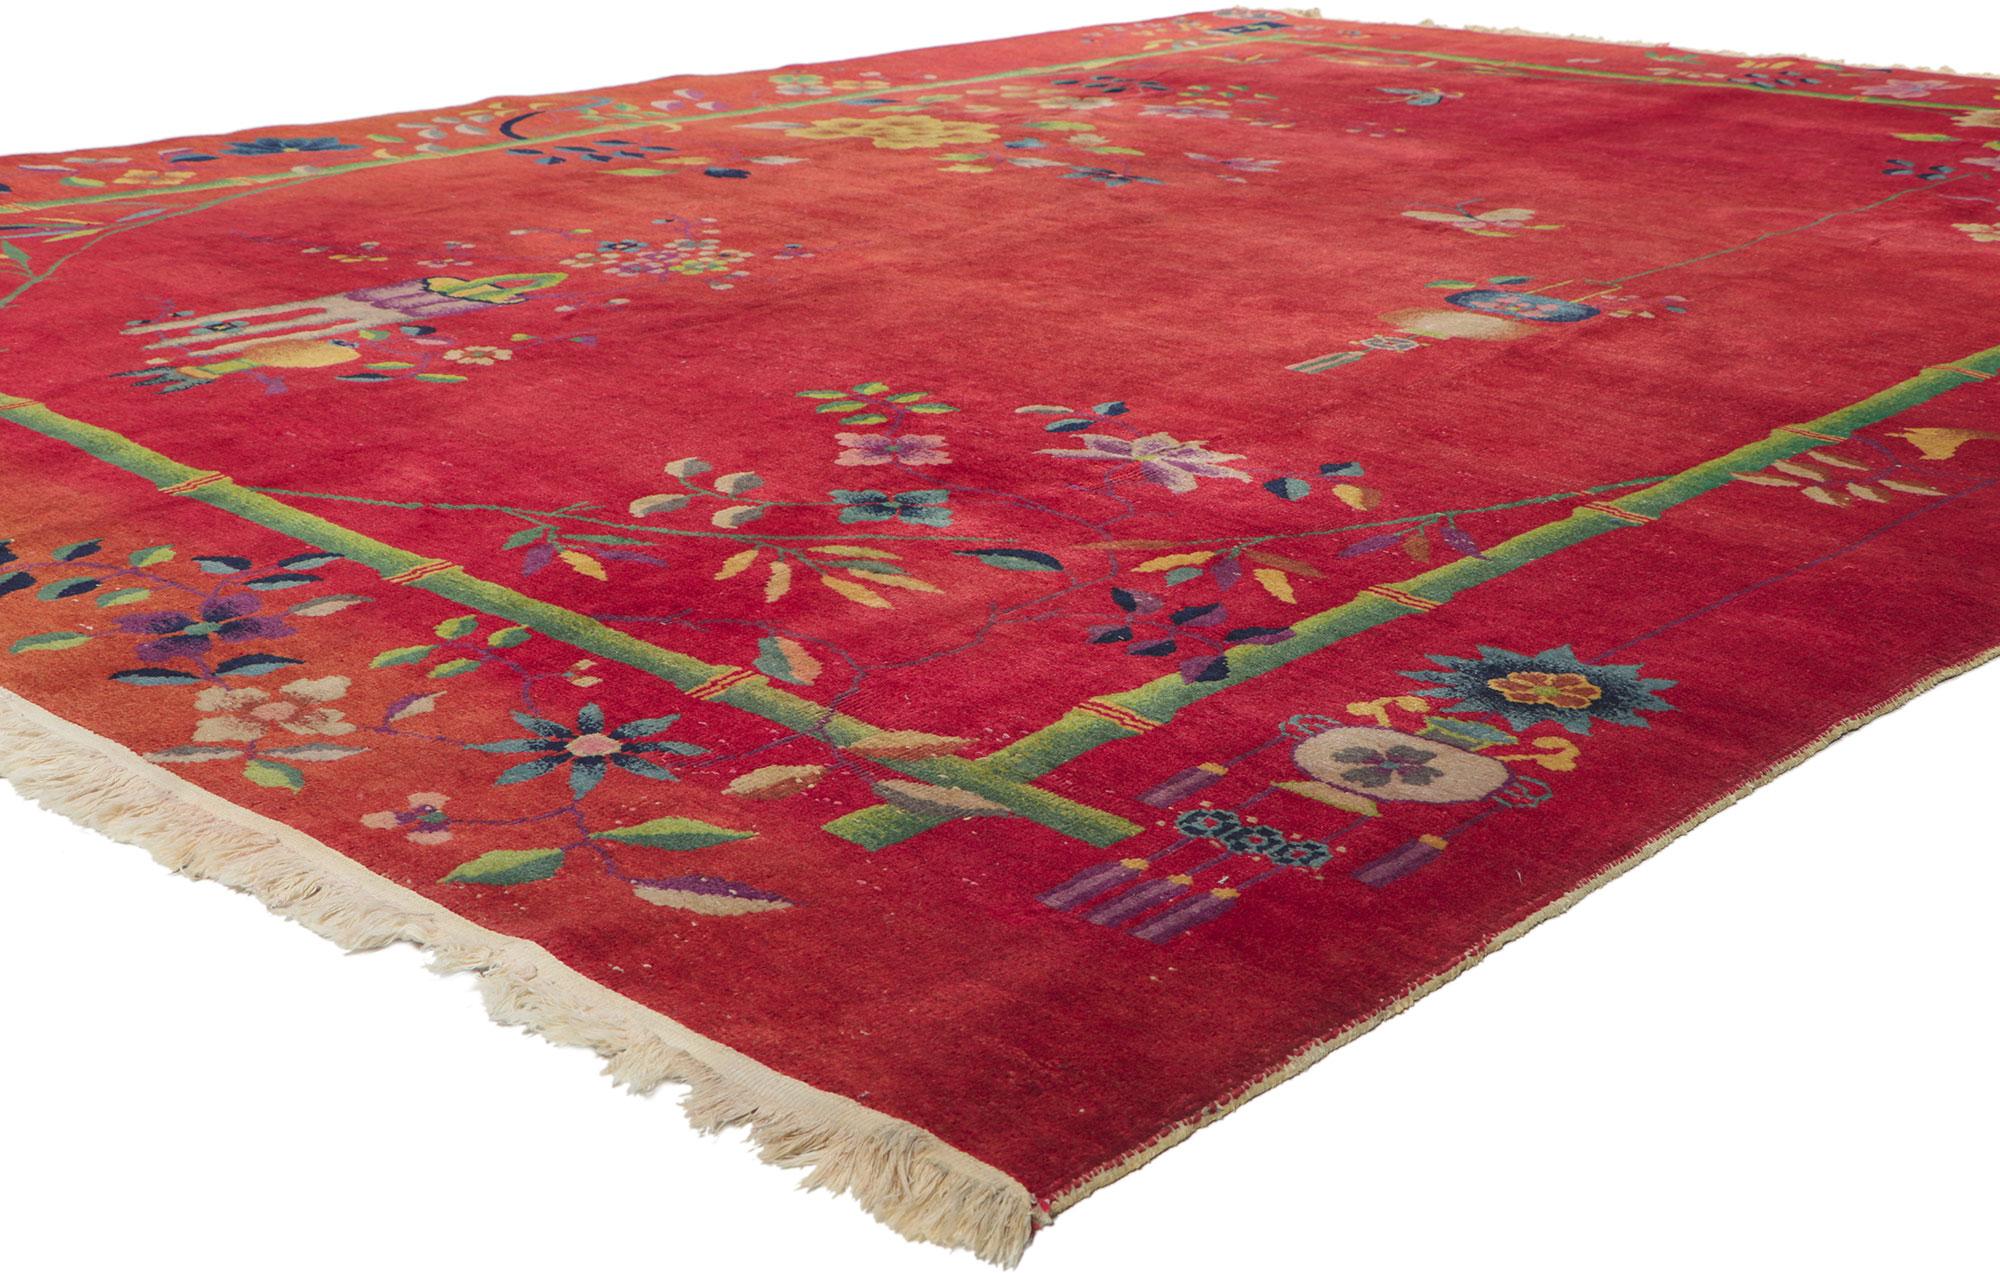 78314 Antique Chinese Art Deco Rug Inspired by Walter Nichols, 8'10 x 11'07. This hand knotted wool antique Chinese Art Deco rug features an all-over floral pattern festooned with large, glorious sprays of flowers. Lotuses, peonies, chrysanthemums,